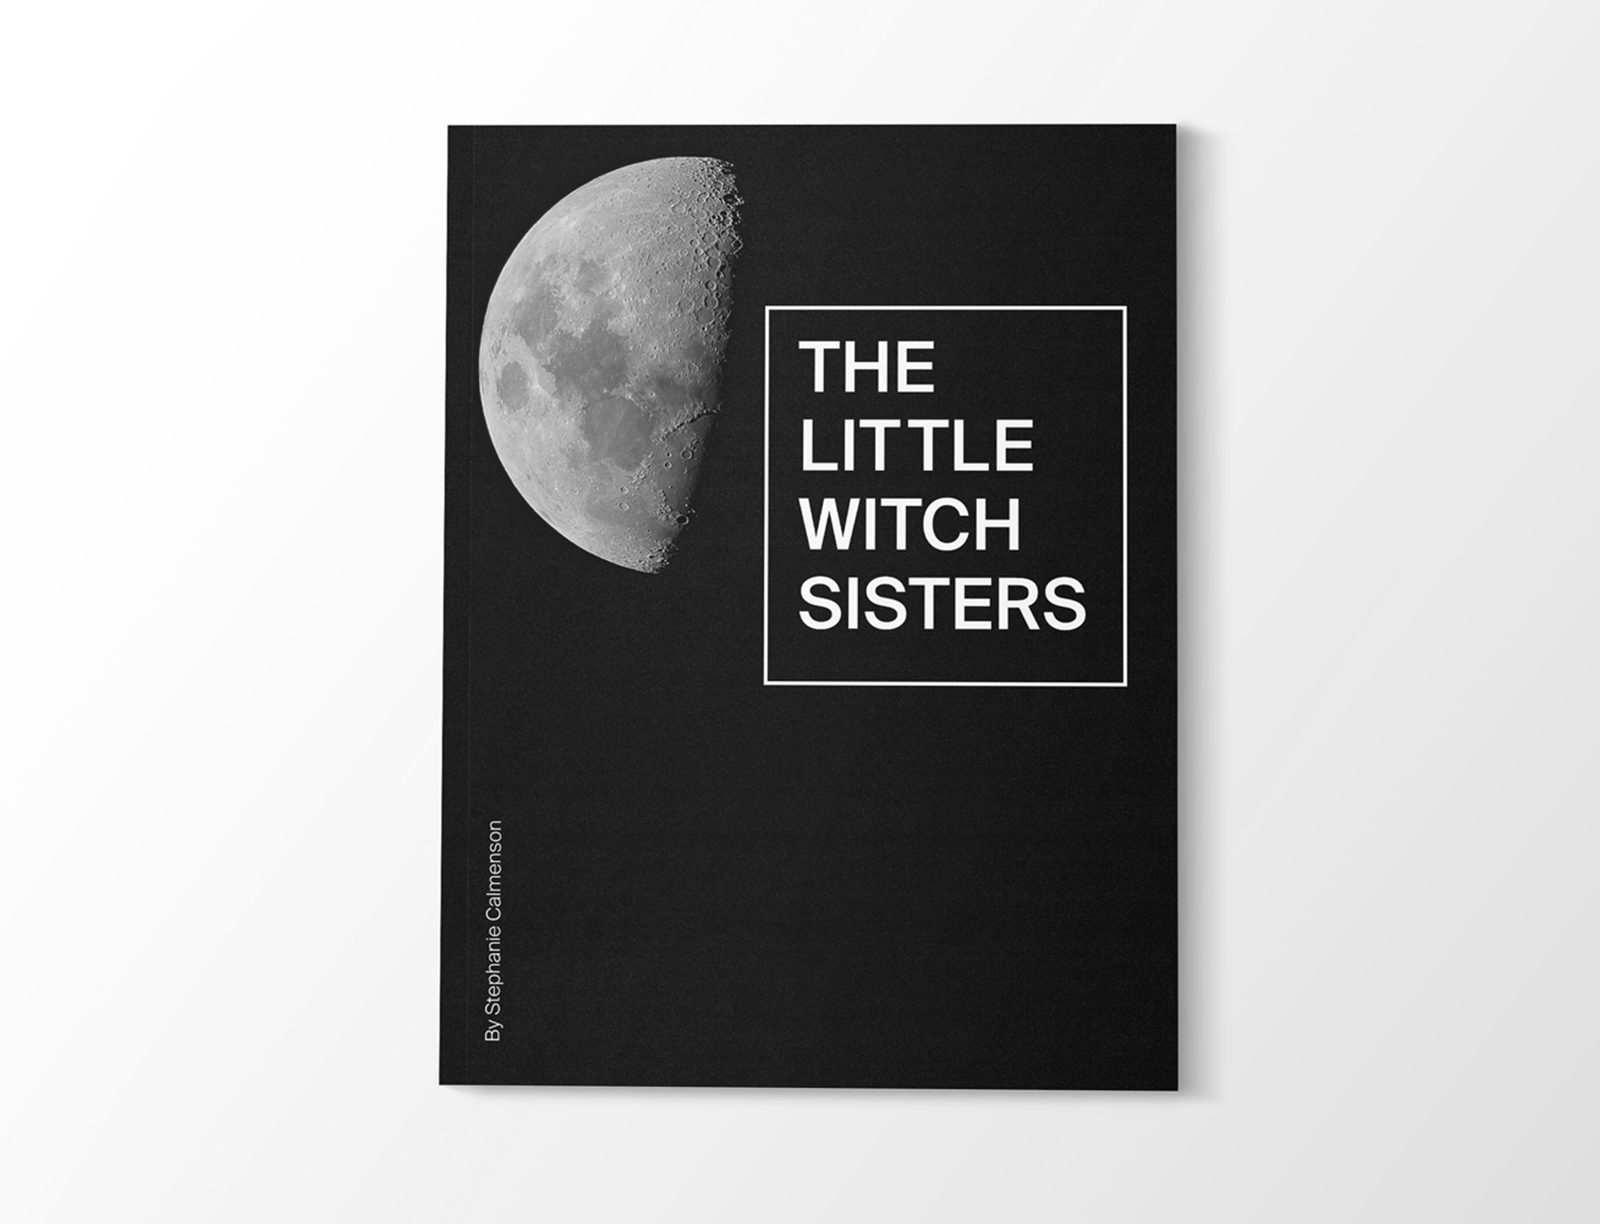 The Little Witch Sisters